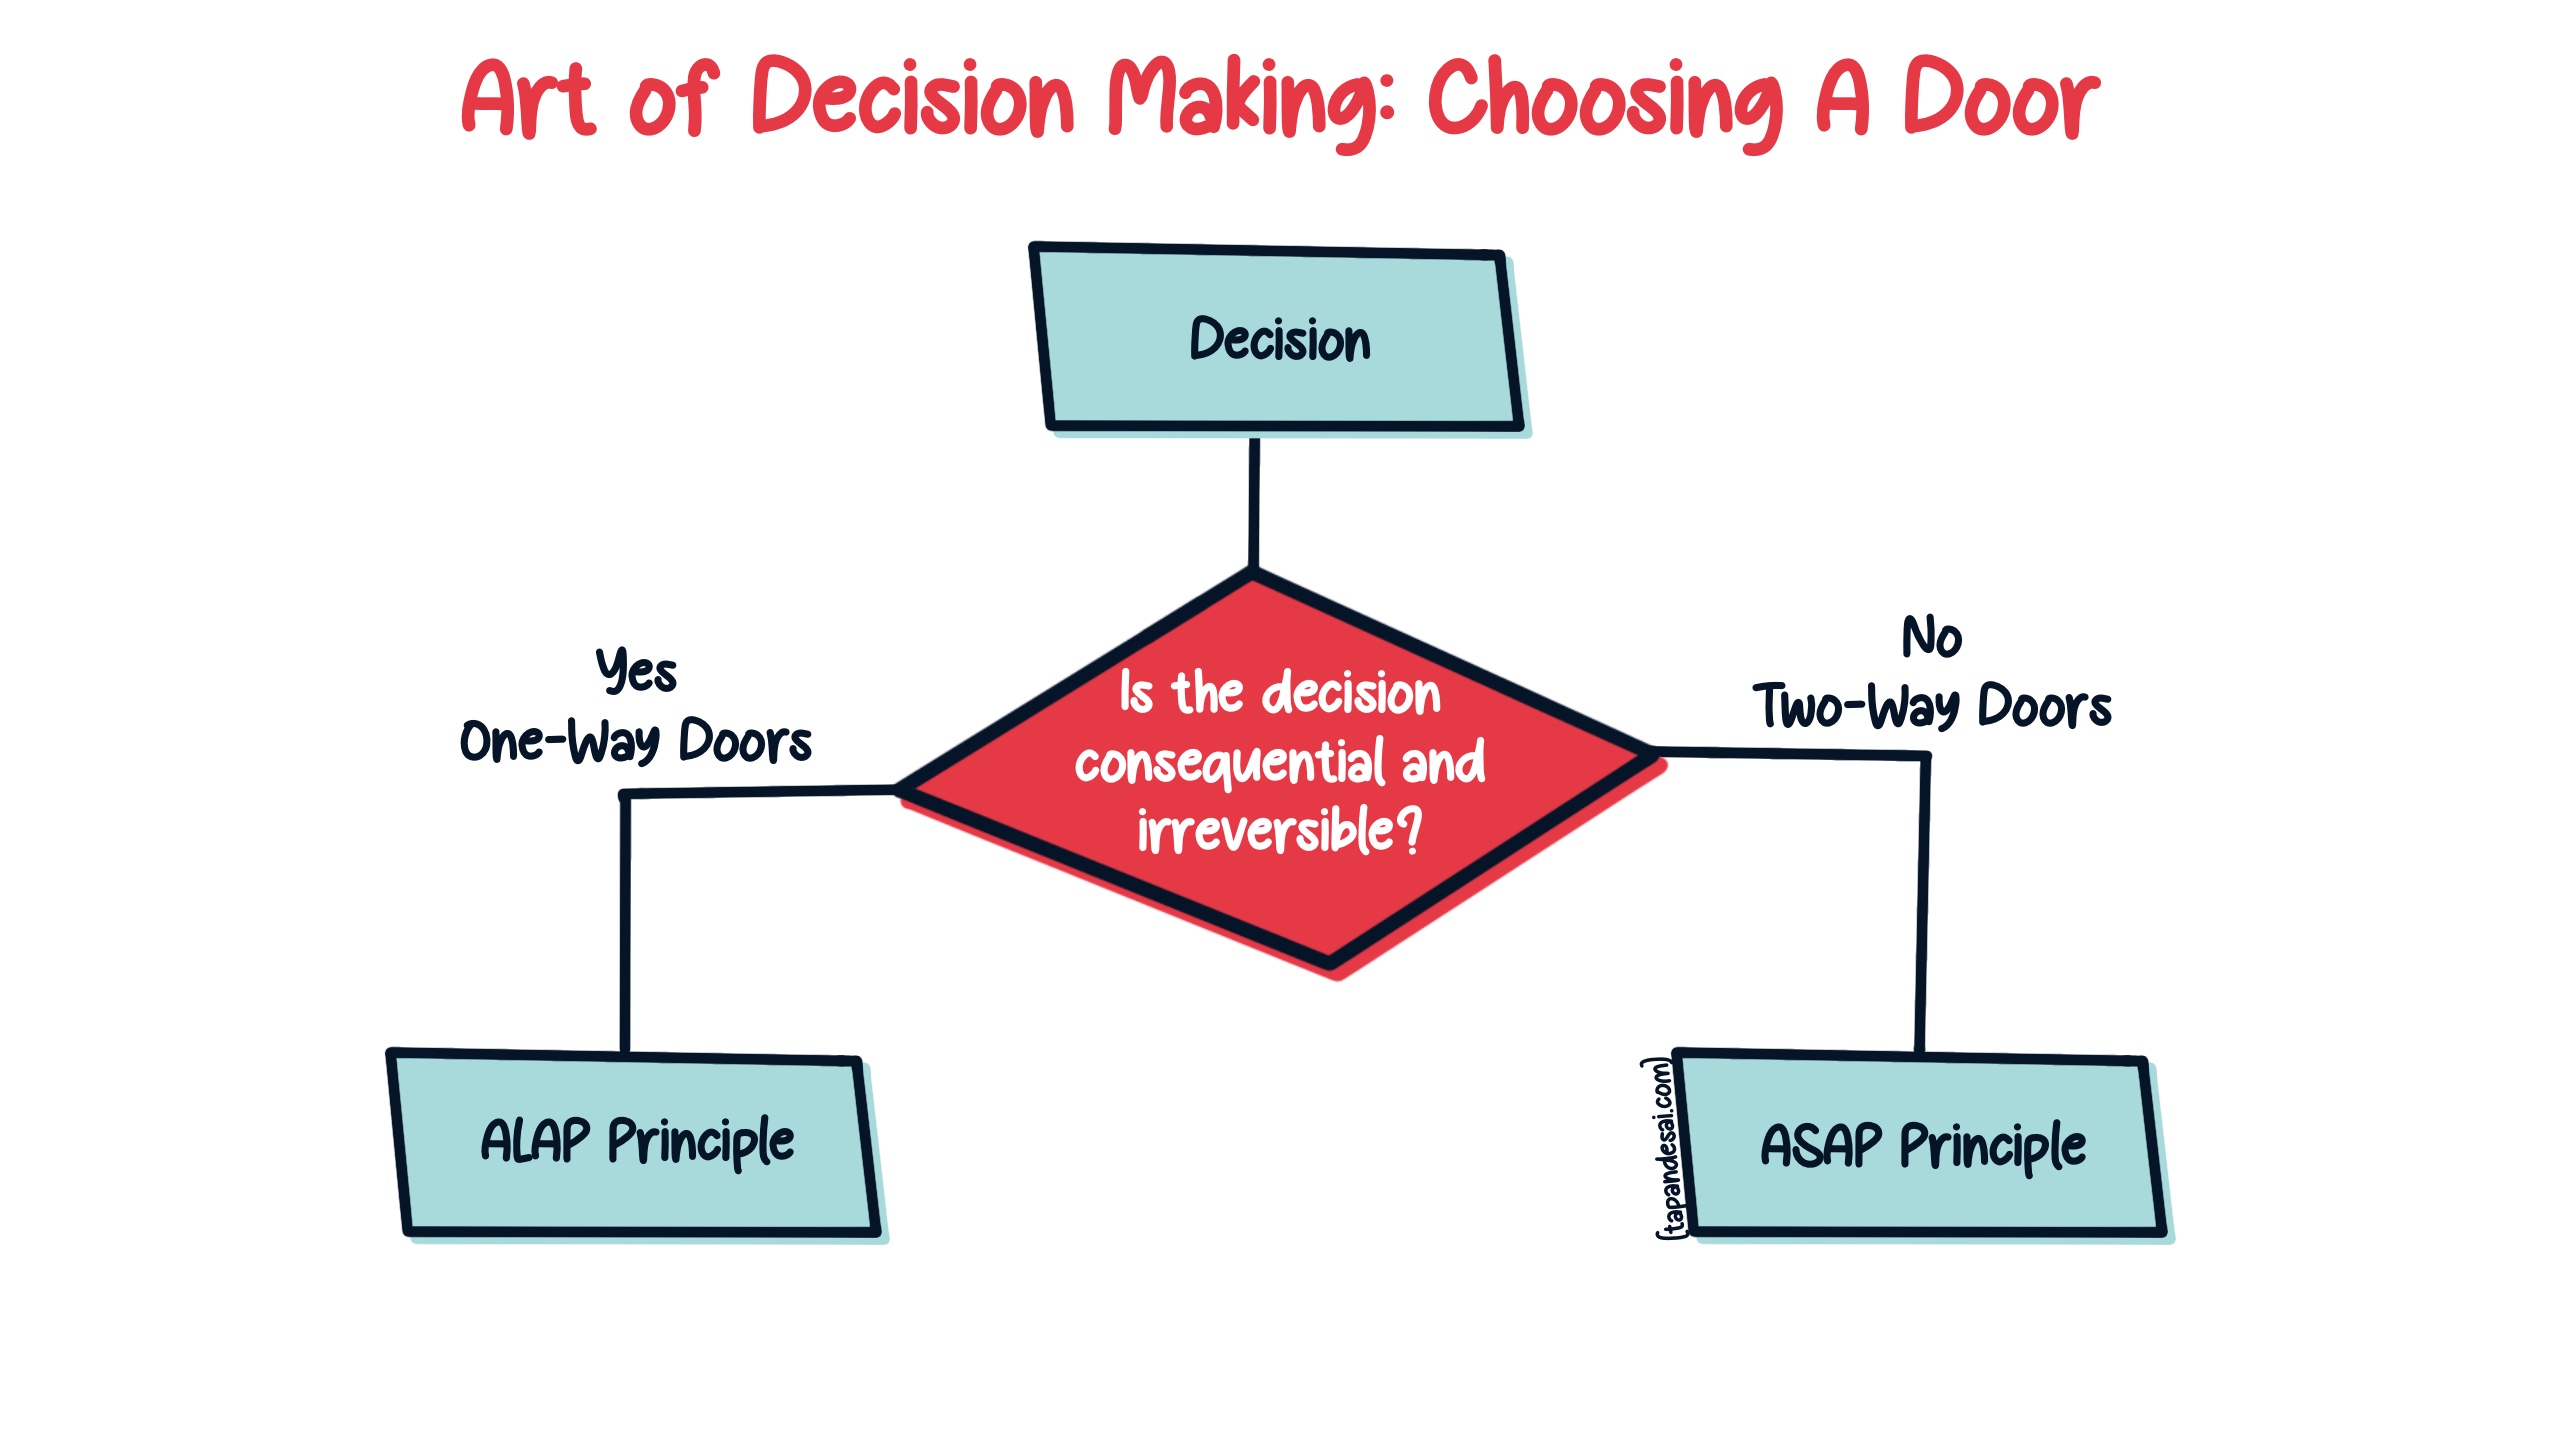 A framework that helps you make decision using Jeff Bezos's one-way door and two-way door decision-making framework visualised.